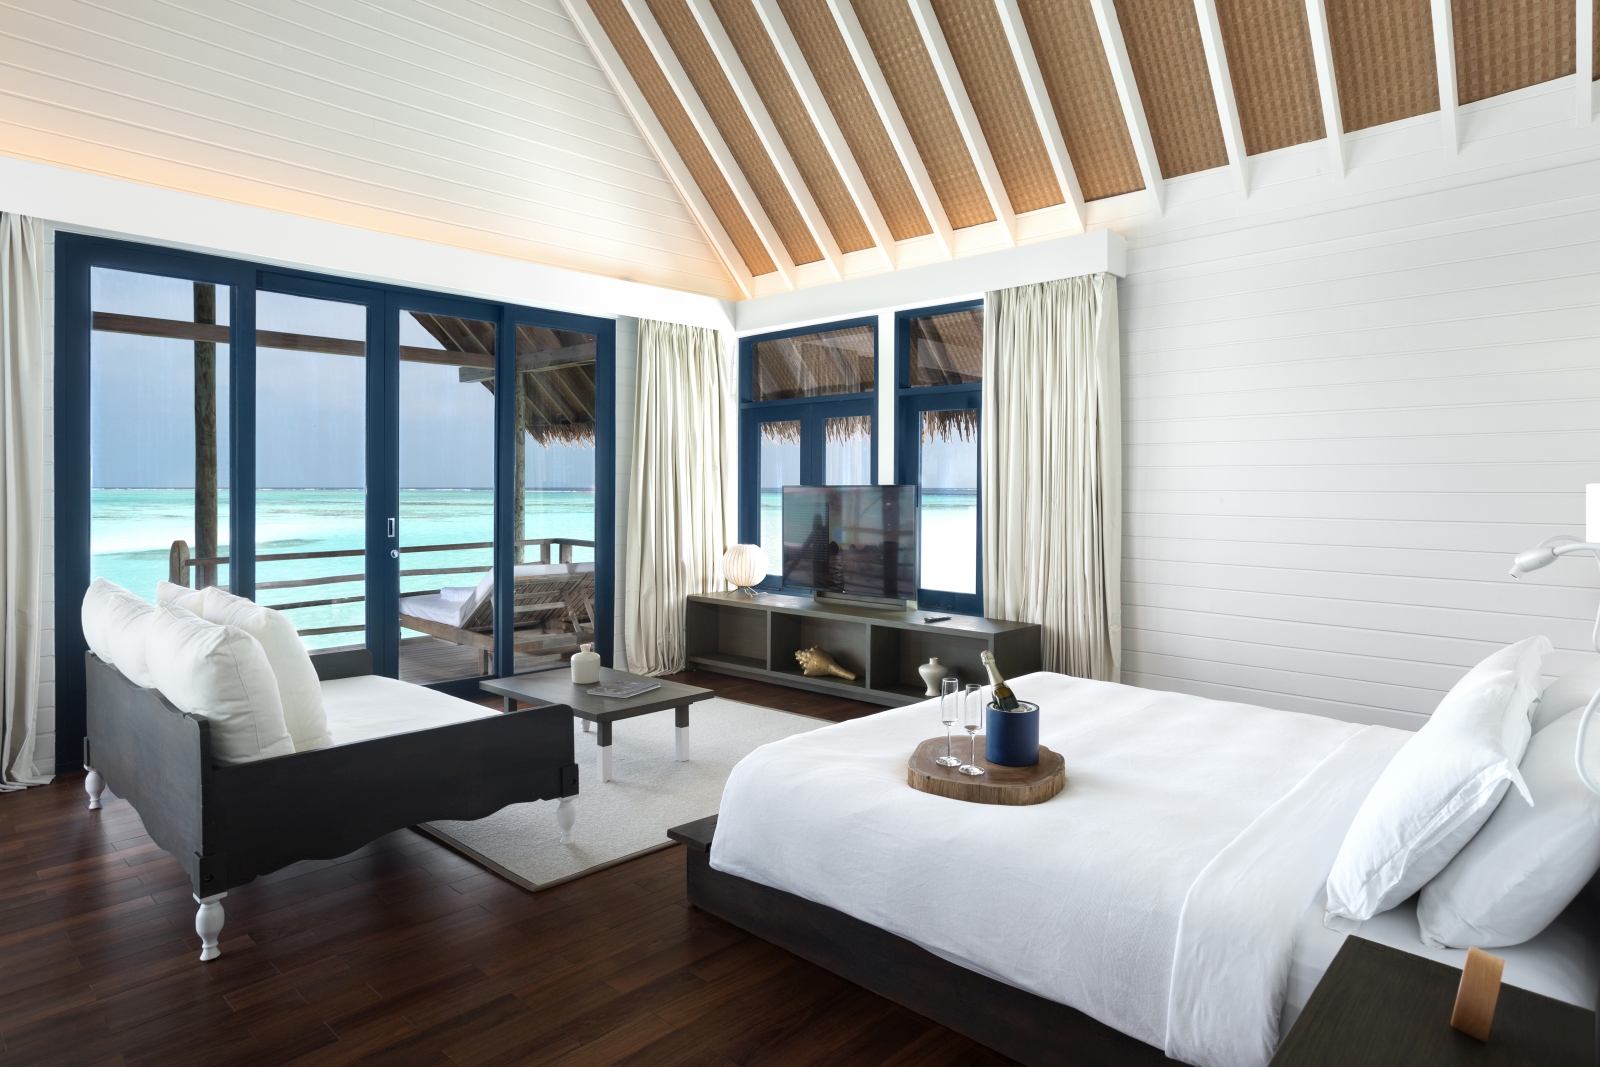 Double bedroom with private deck of a Water Villa at luxury resort Cocoa Island in the Maldives